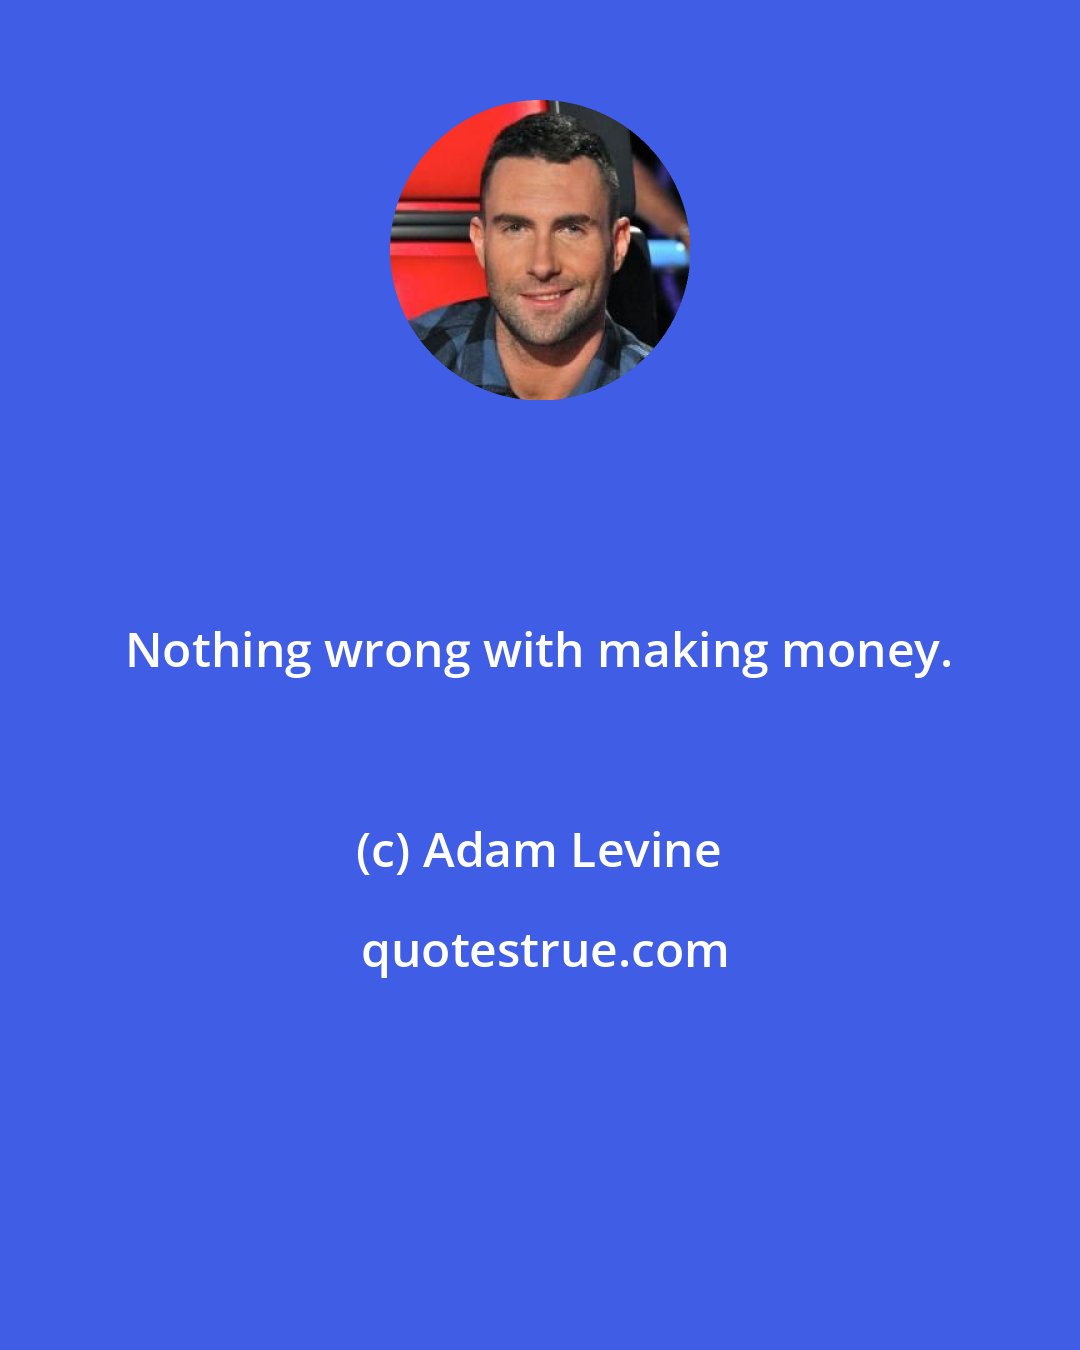 Adam Levine: Nothing wrong with making money.